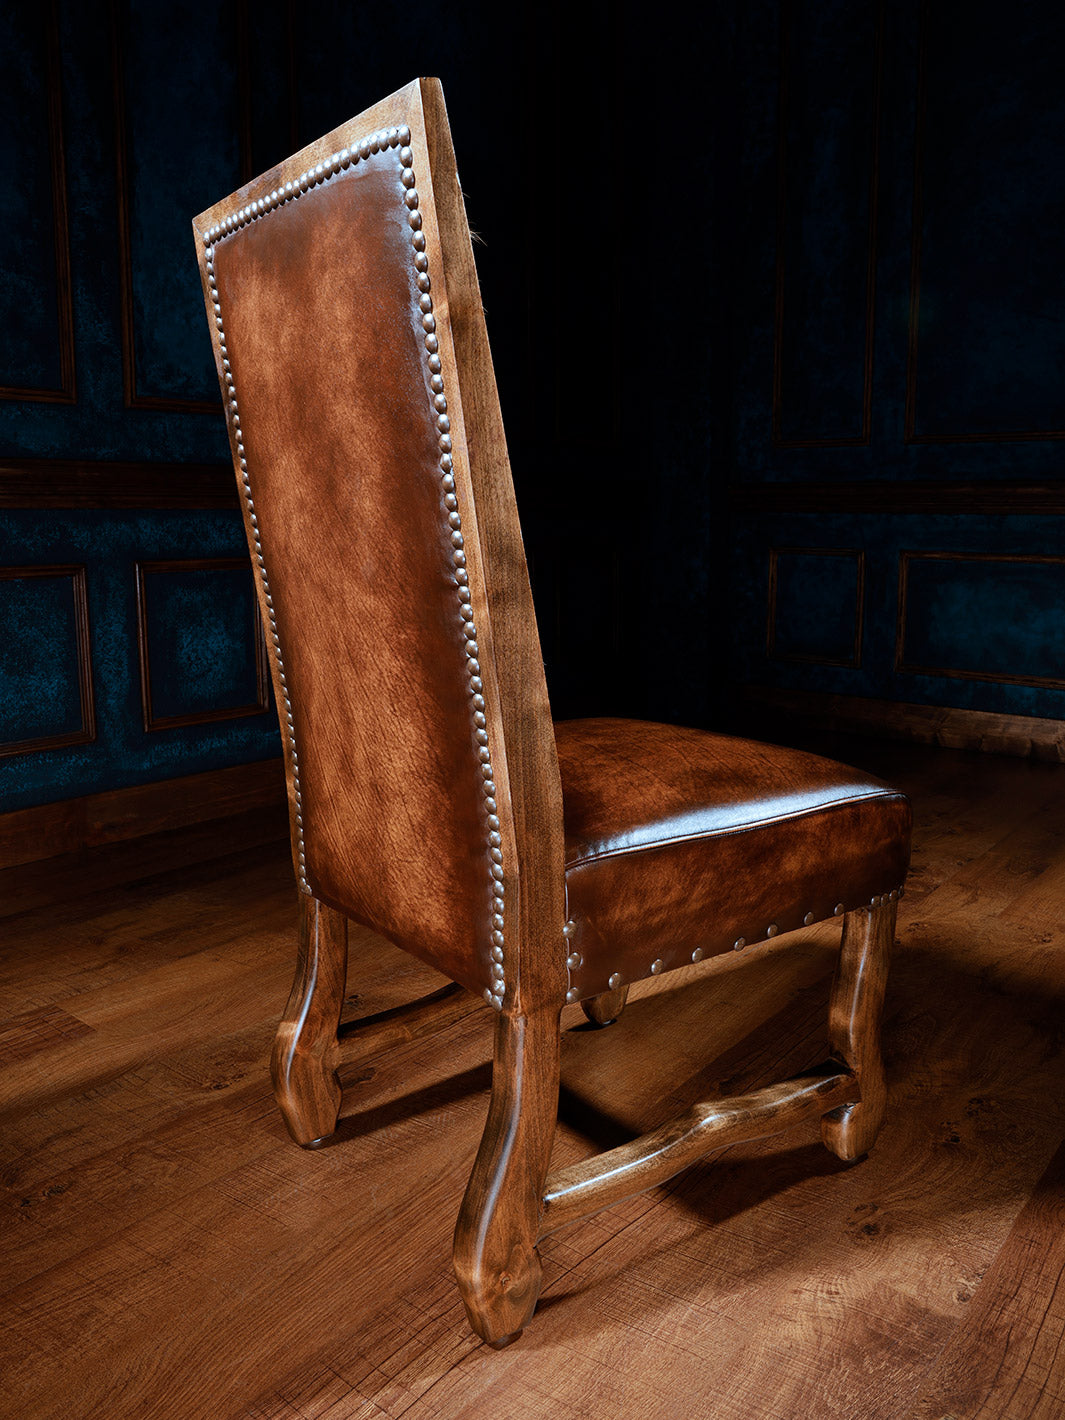 rear view of axis deer hide side chair with burnished leather seat